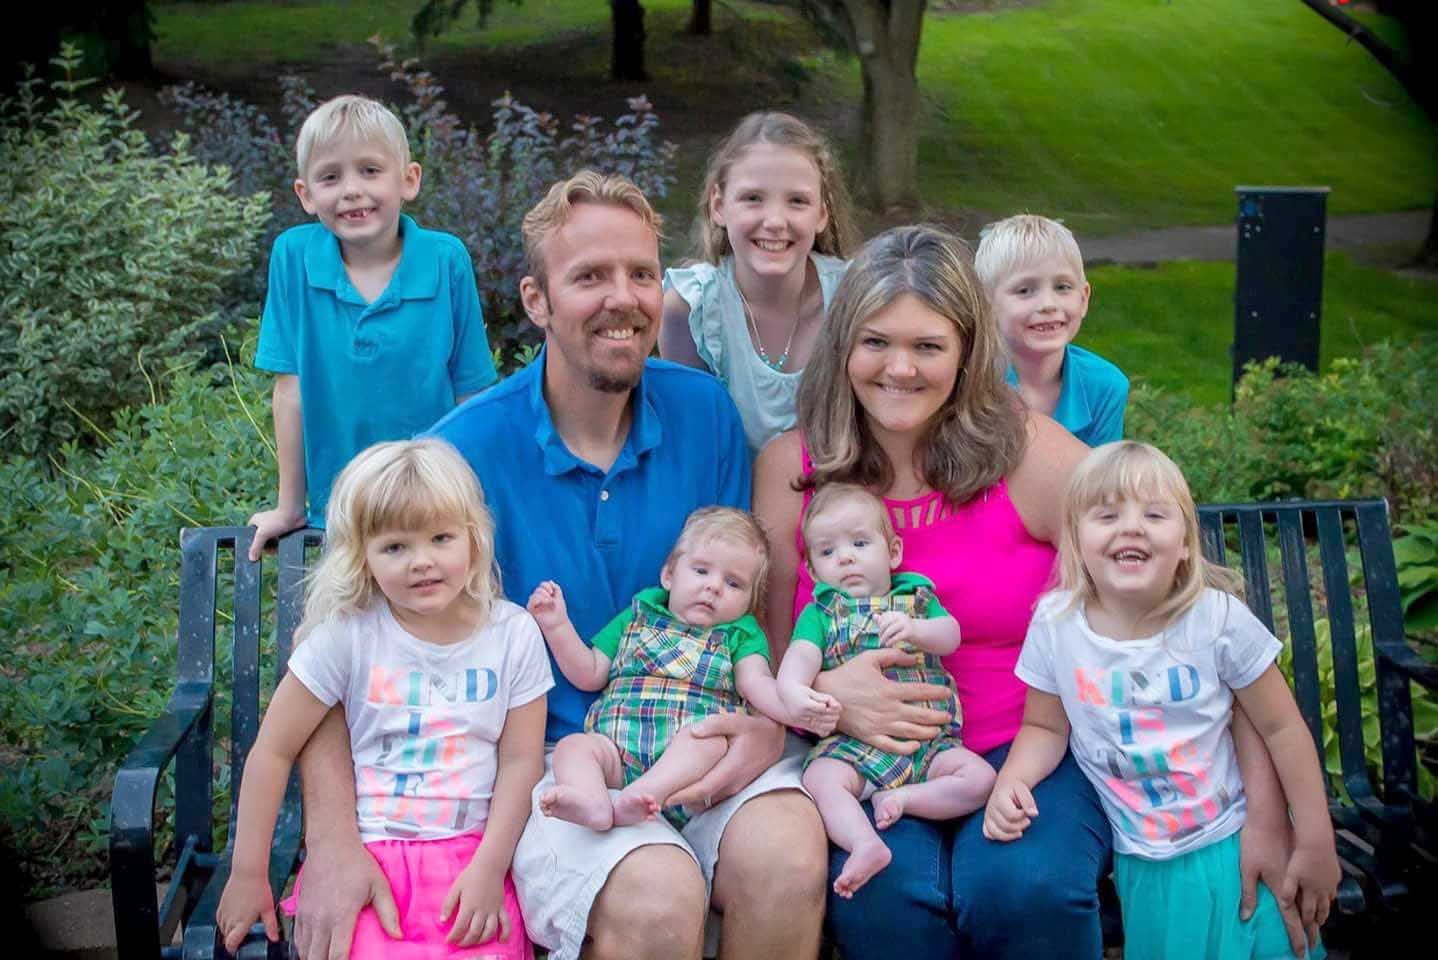 PHOTO: Julie, 40 and Lance, 39, seen in this undated photo with their daughter Kaitlyn, 9, and their three sets of twins, Cody and Caleb, bith 6, Chelsea and Kelsea, both 4, Caden and Colton, both 10 months.